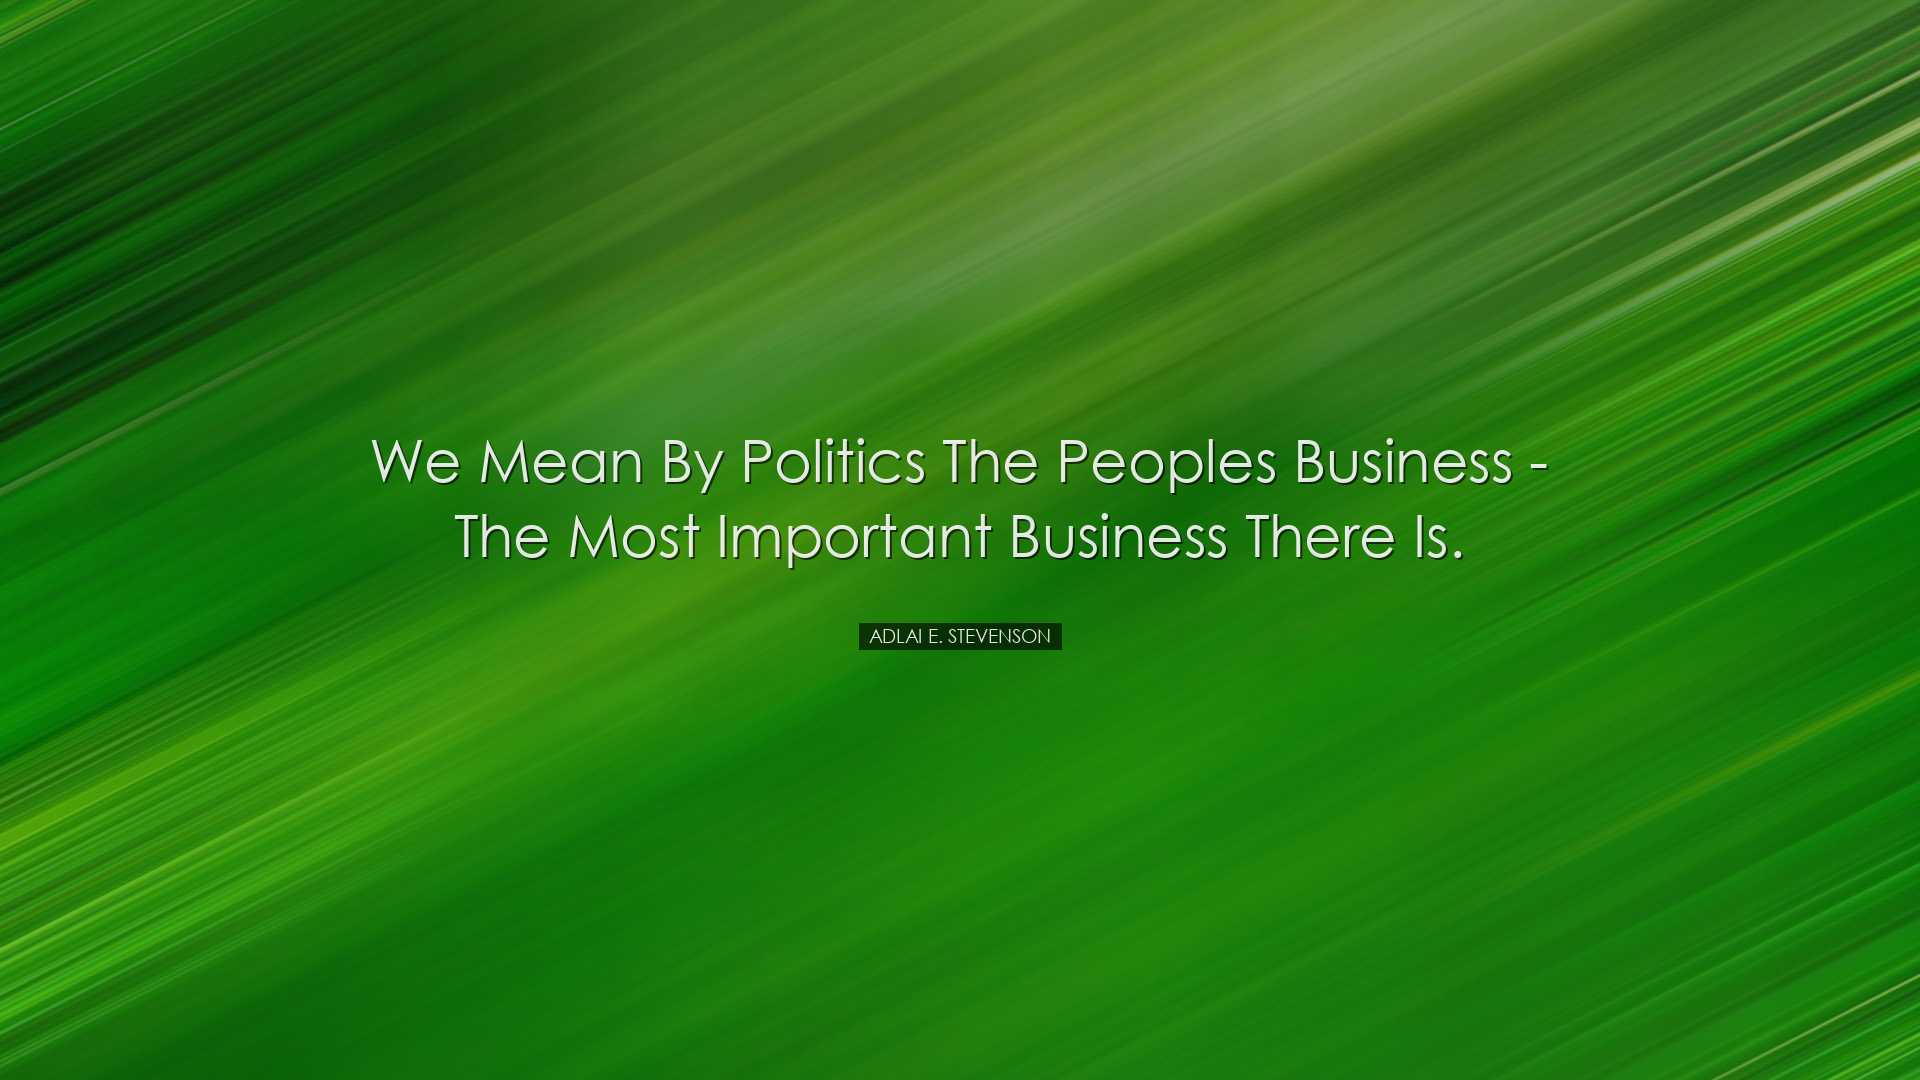 We mean by politics the peoples business - the most important busi